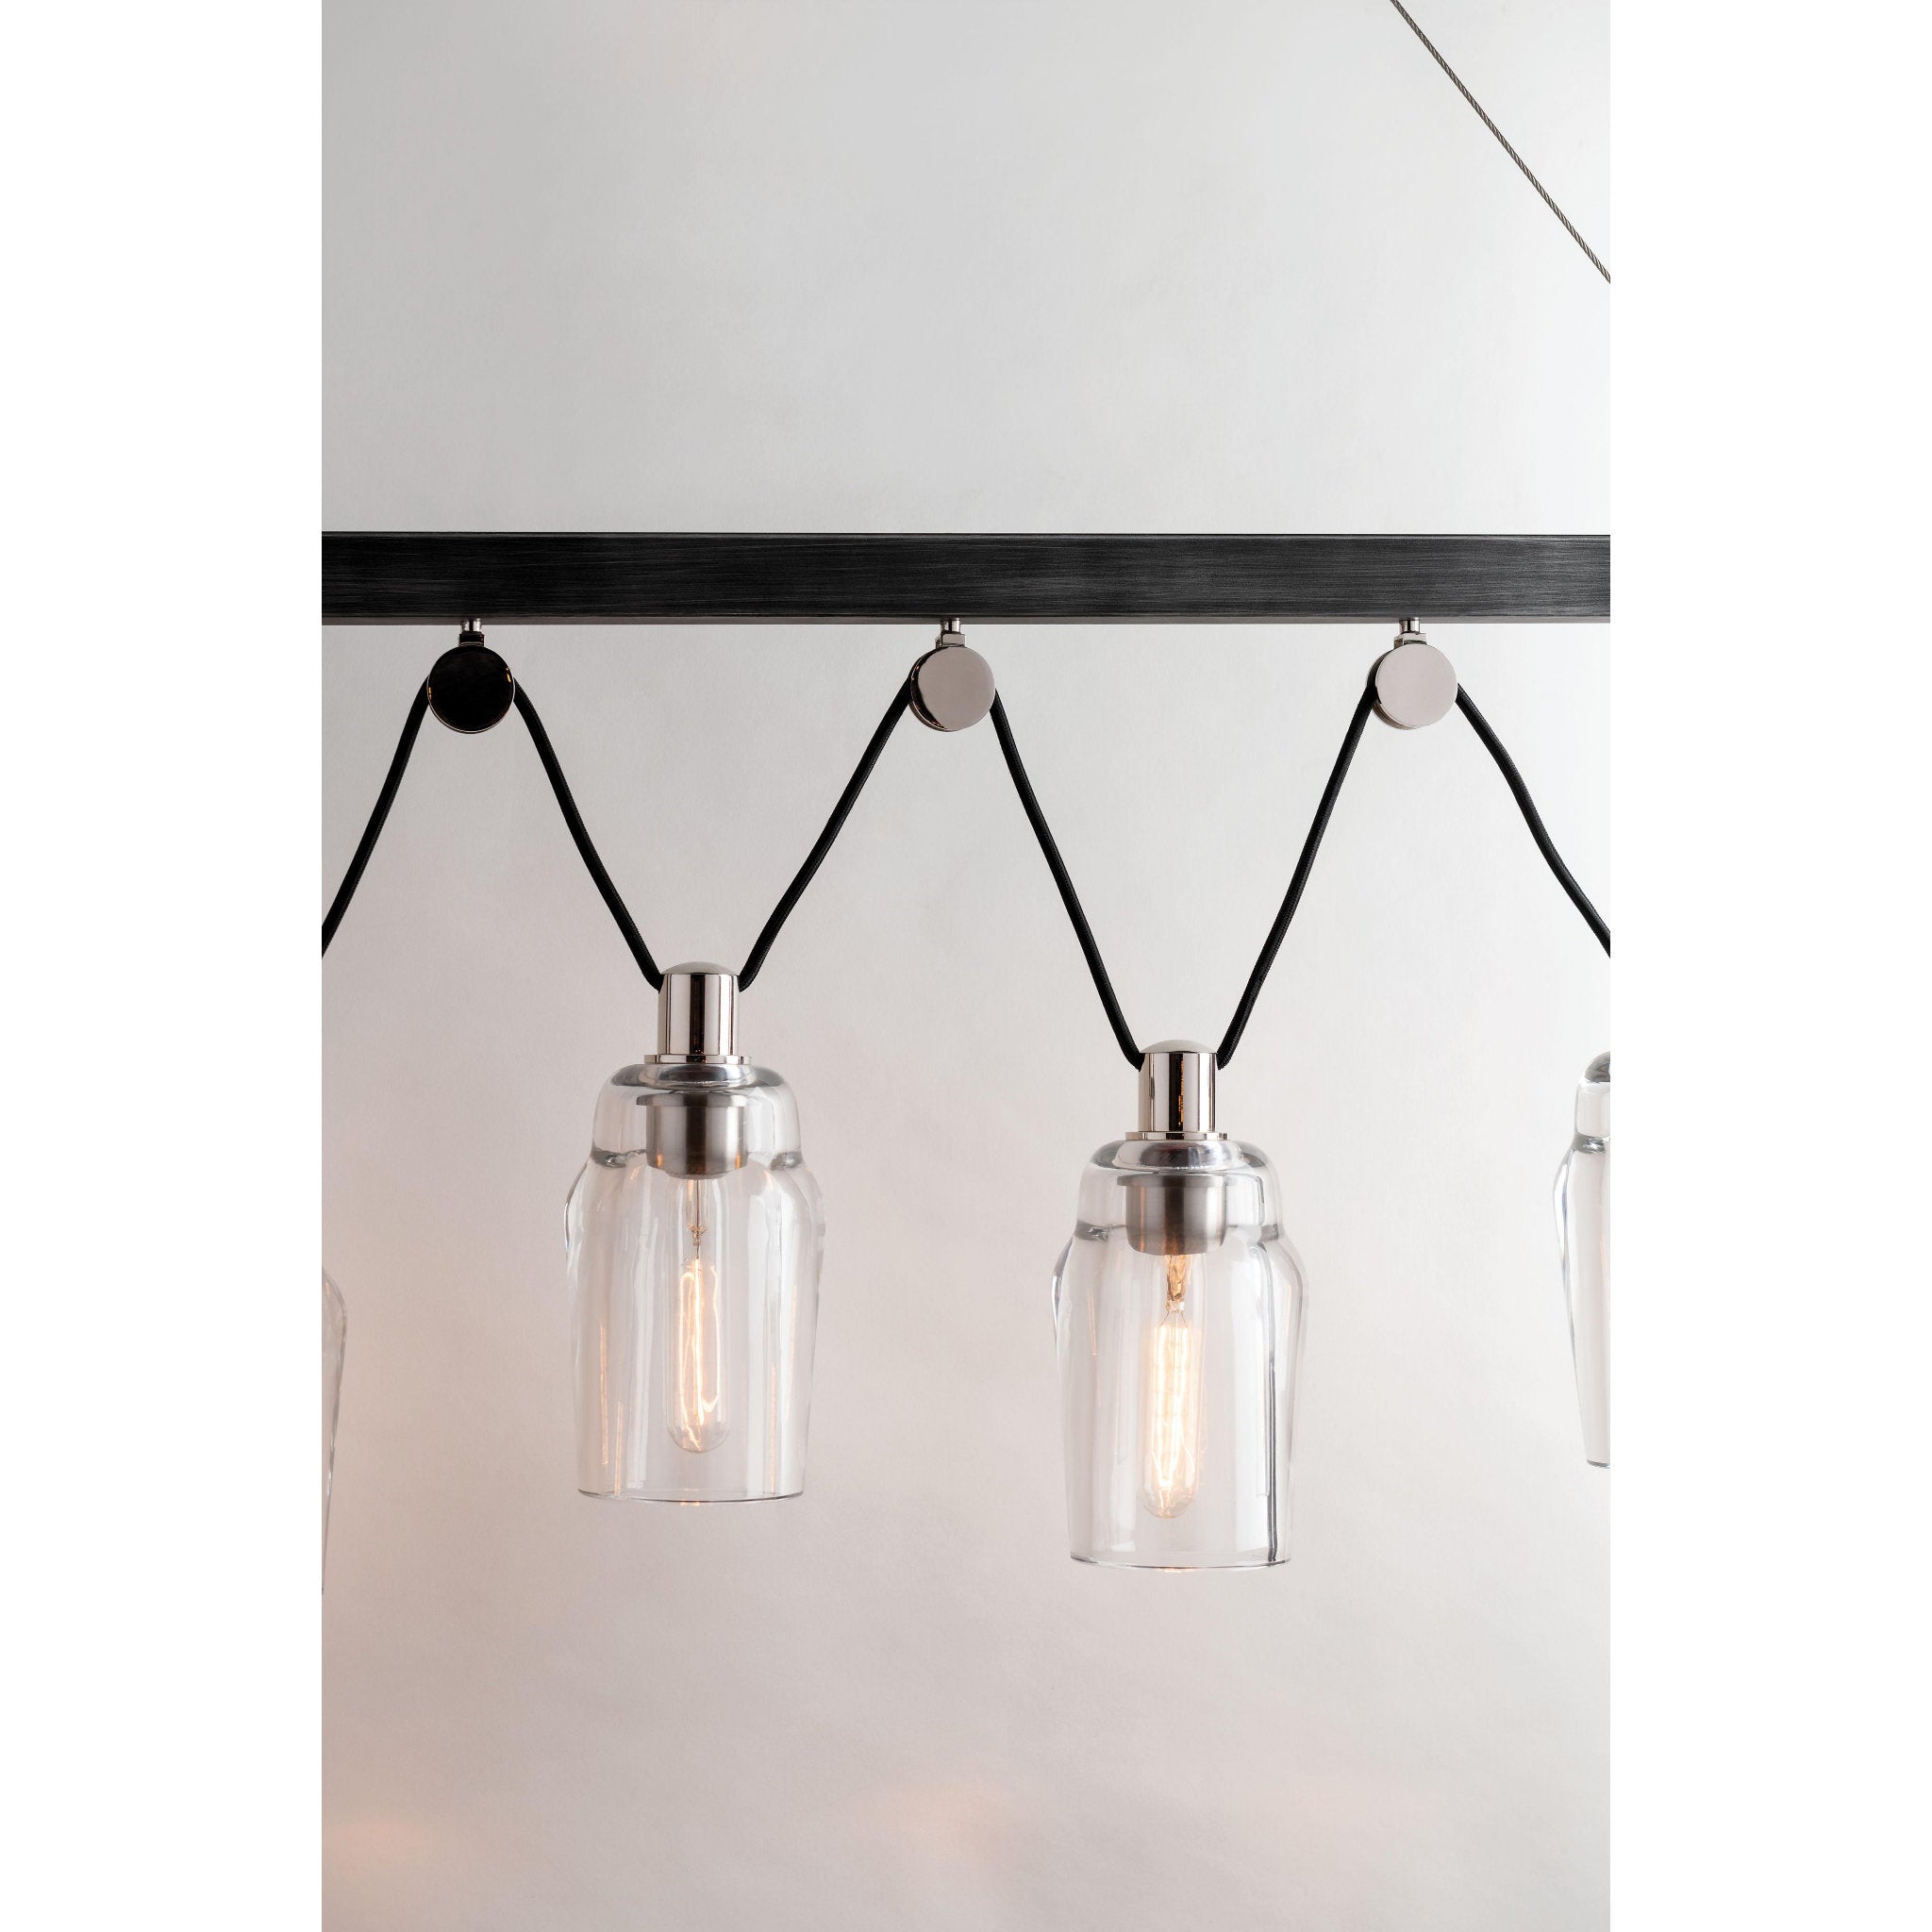 Citizen 8 Light Chandelier in Graphite And Polished Nickel